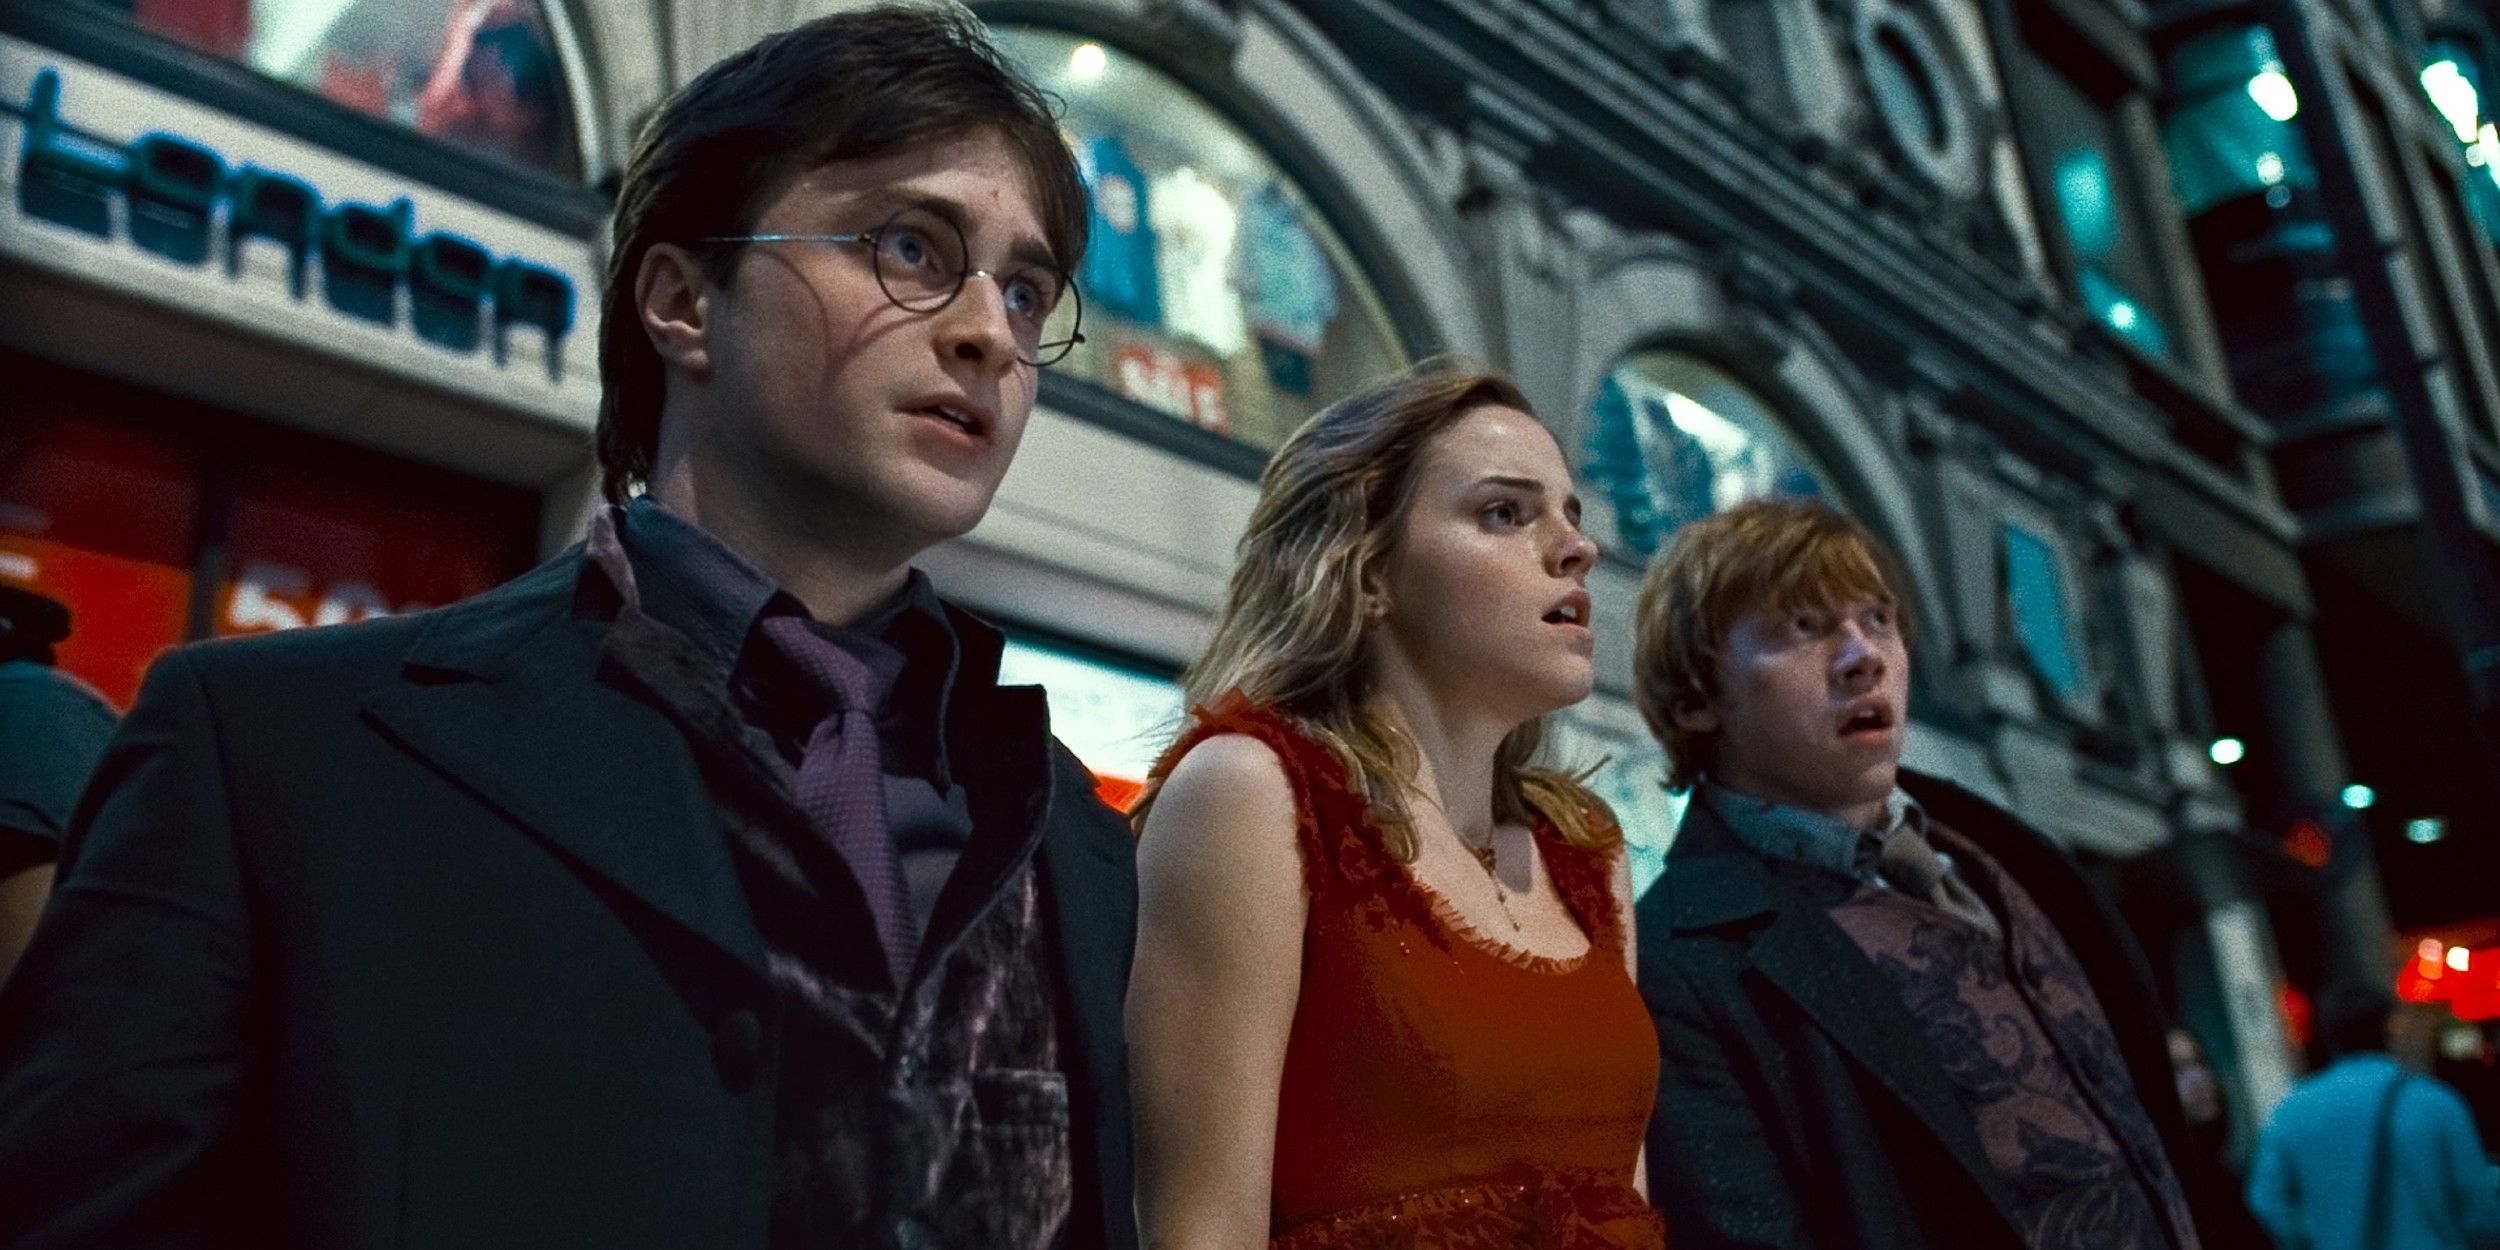 Daniel Radcliffe, Emma Watson, and Rupert Grint in Harry Potter and the Deathly Hallows Part 1